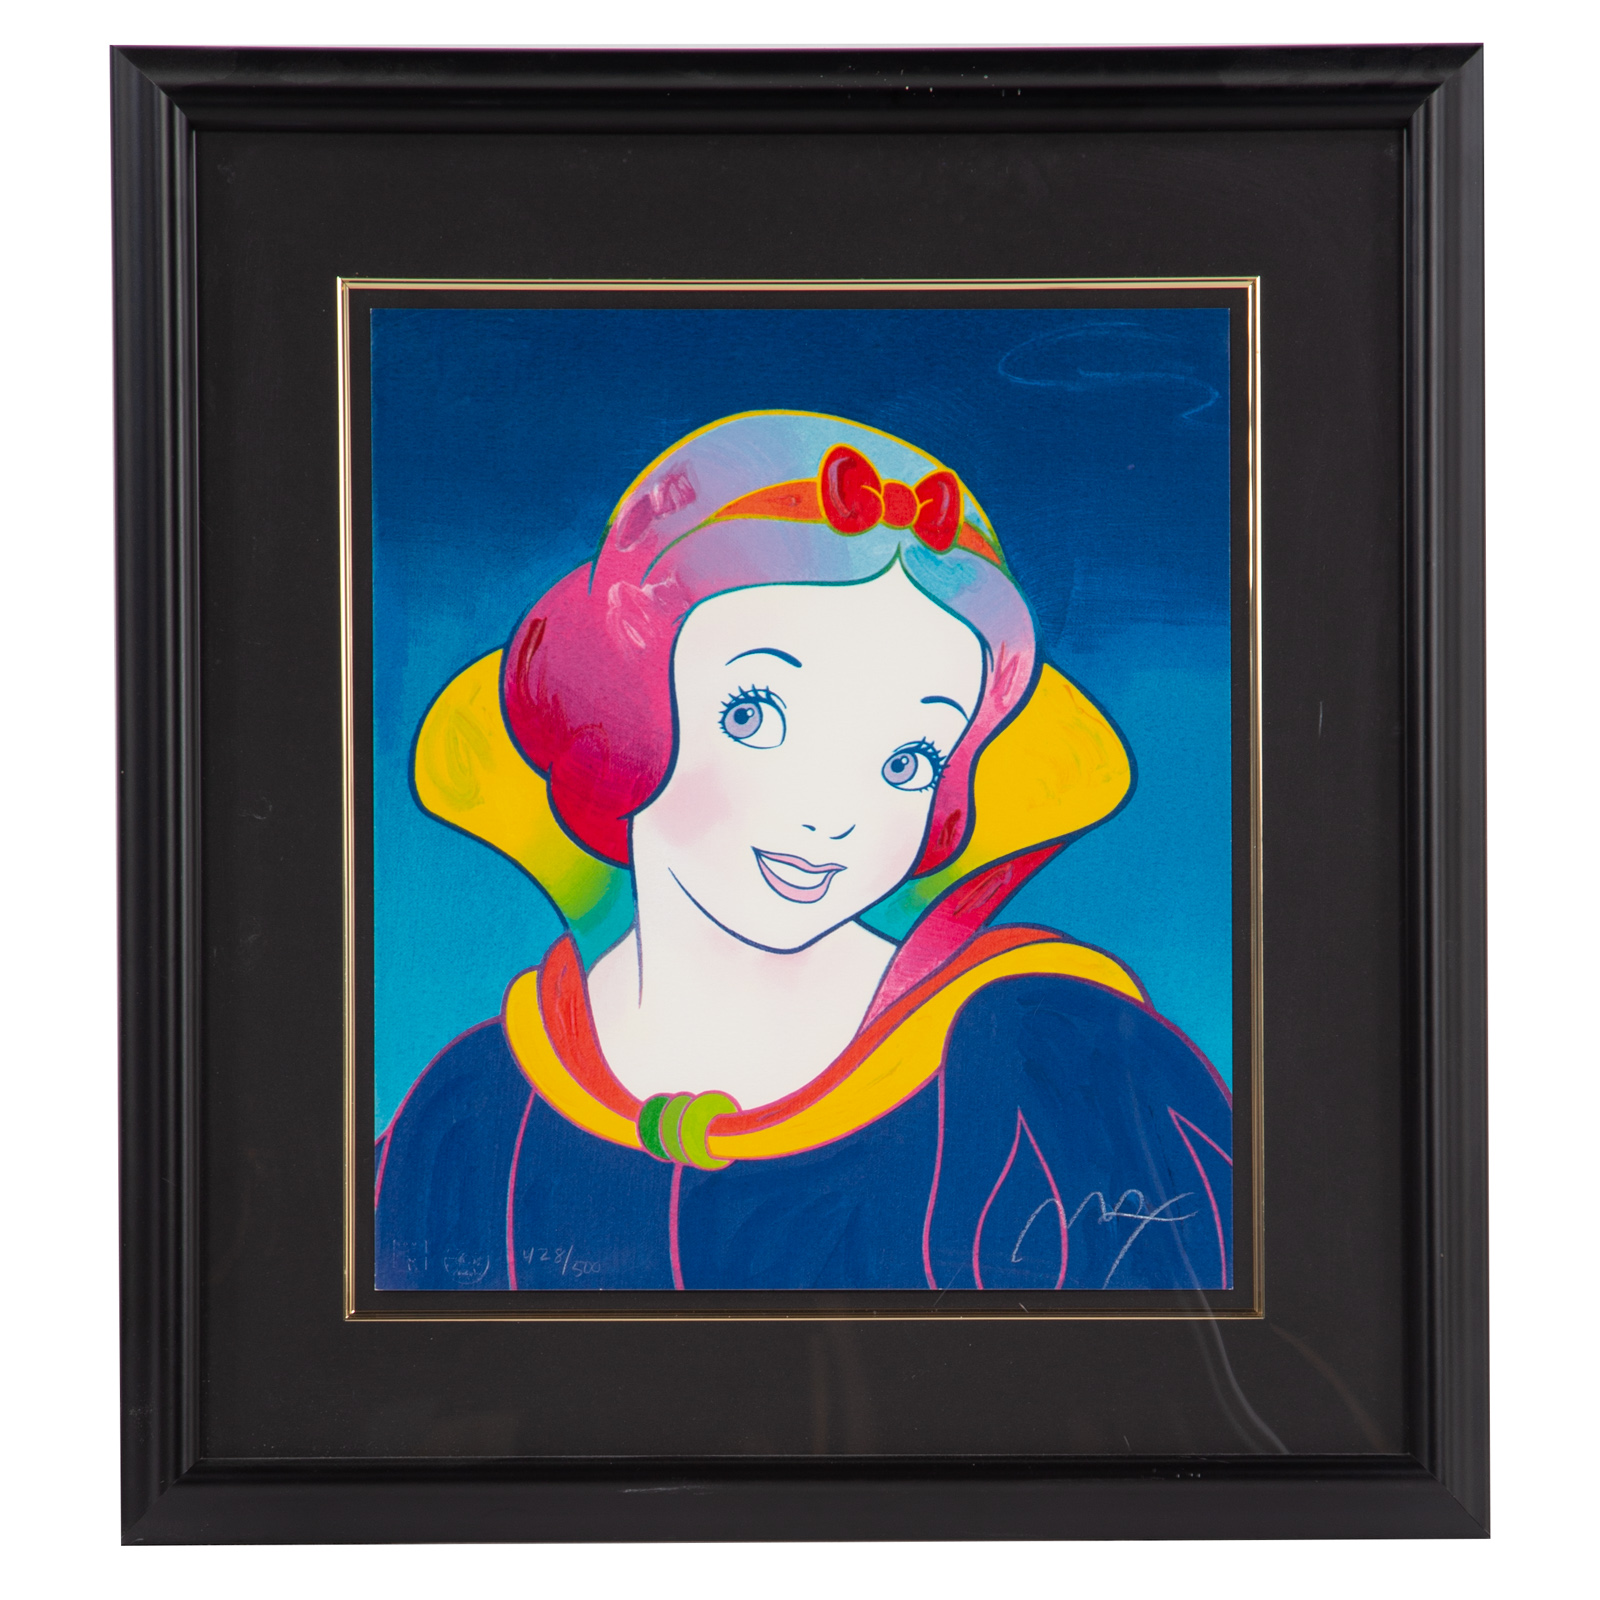 PETER MAX. "SNOW WHITE," COLOR